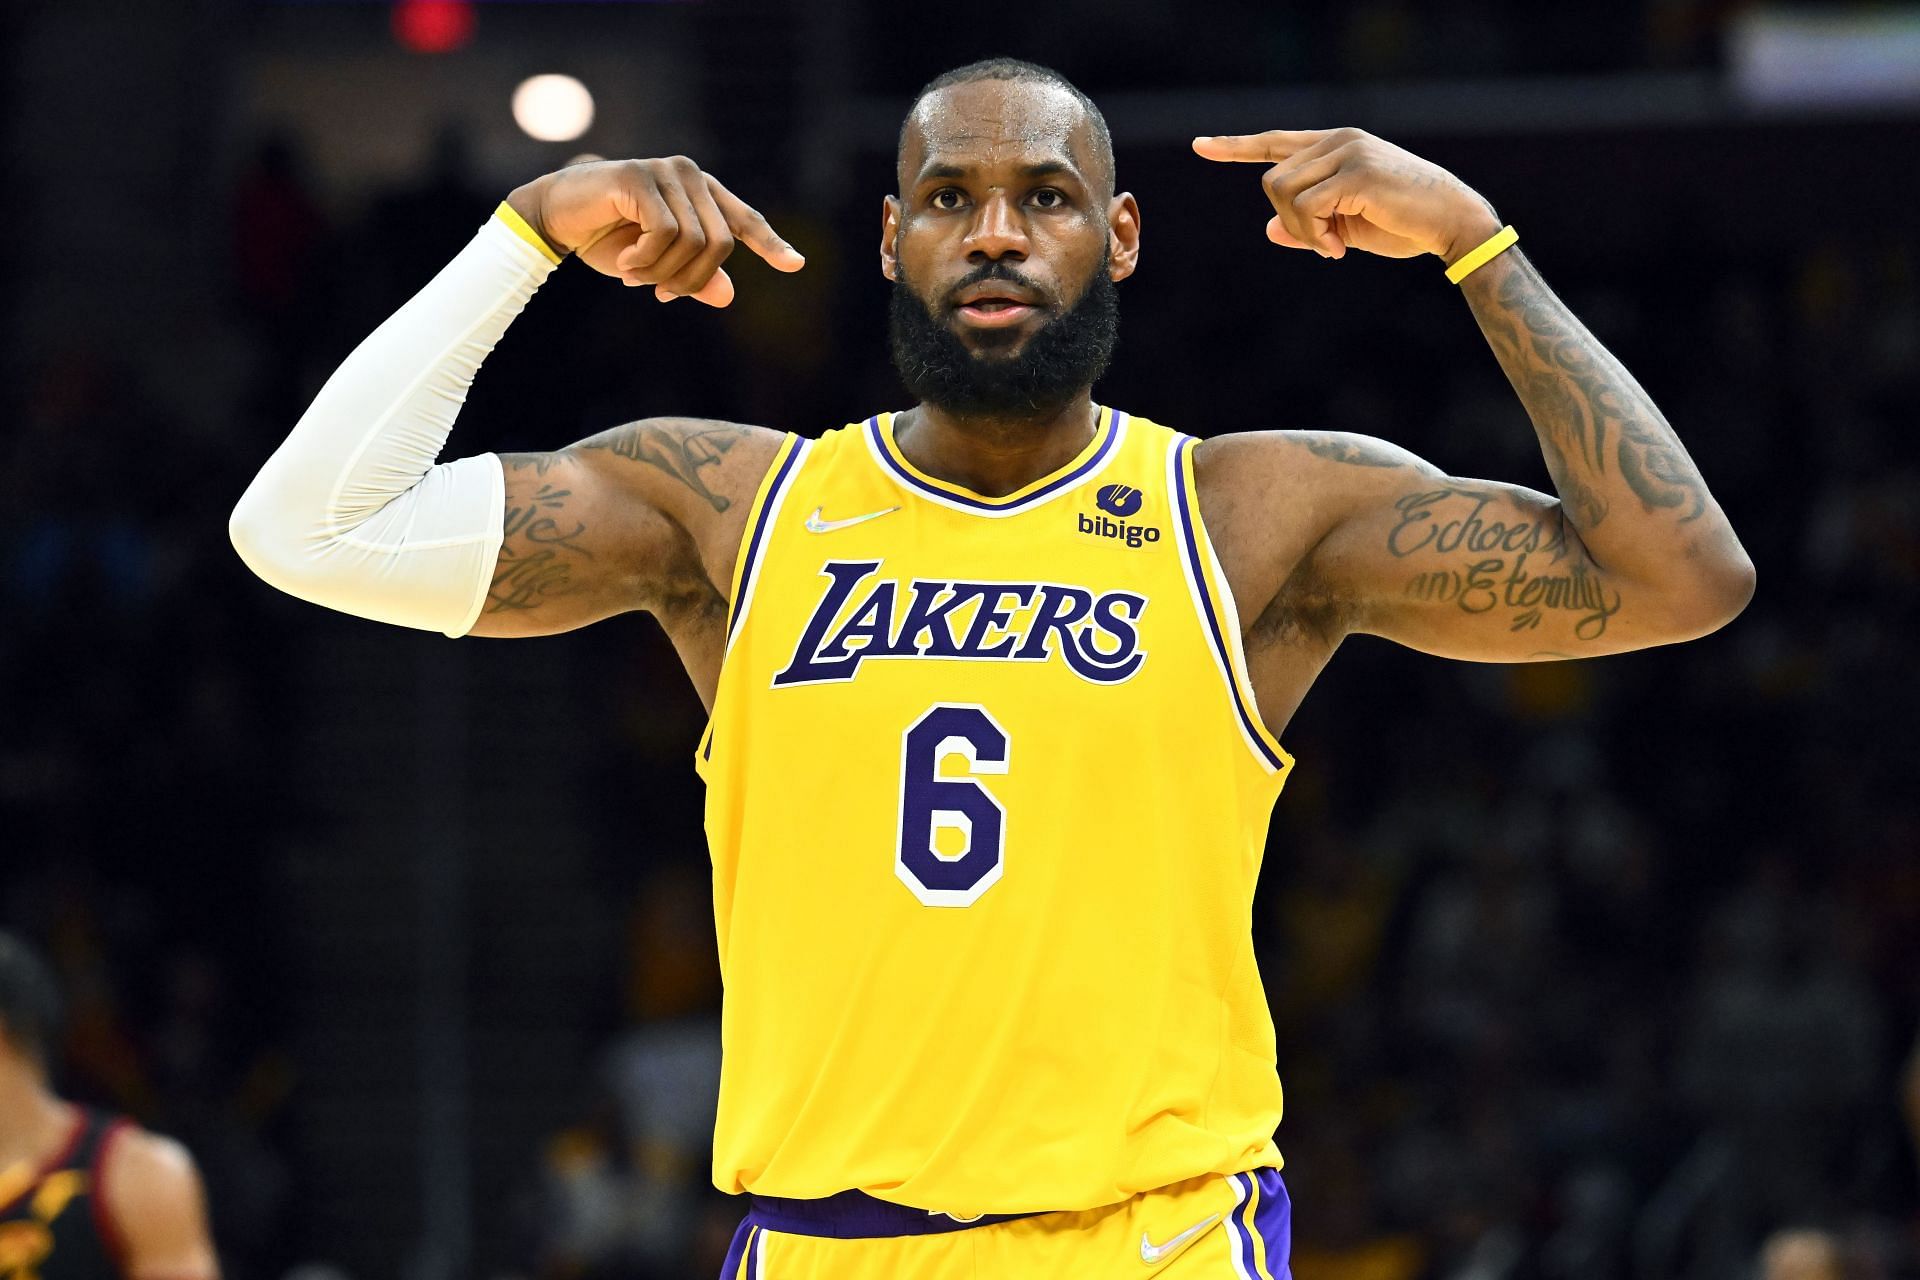 LeBron James during the Los Angeles Lakers v Cleveland Cavaliers